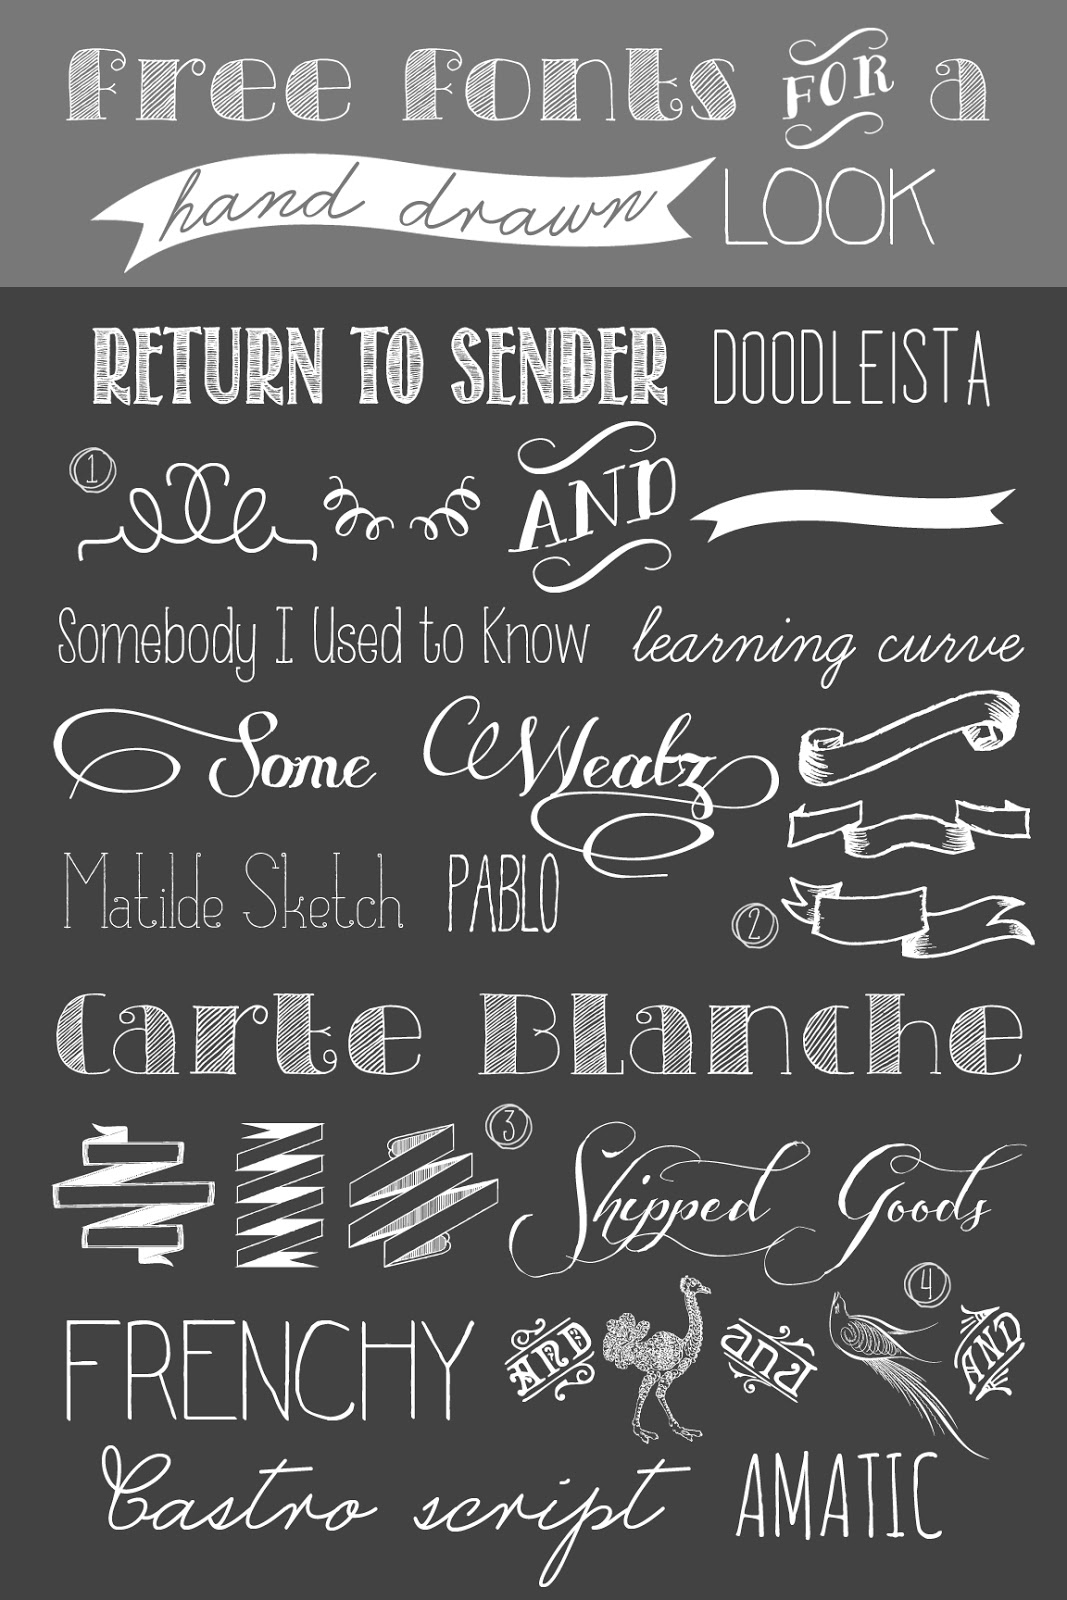  ber Chic for Cheap Free  Fonts  for a Hand Drawn Look